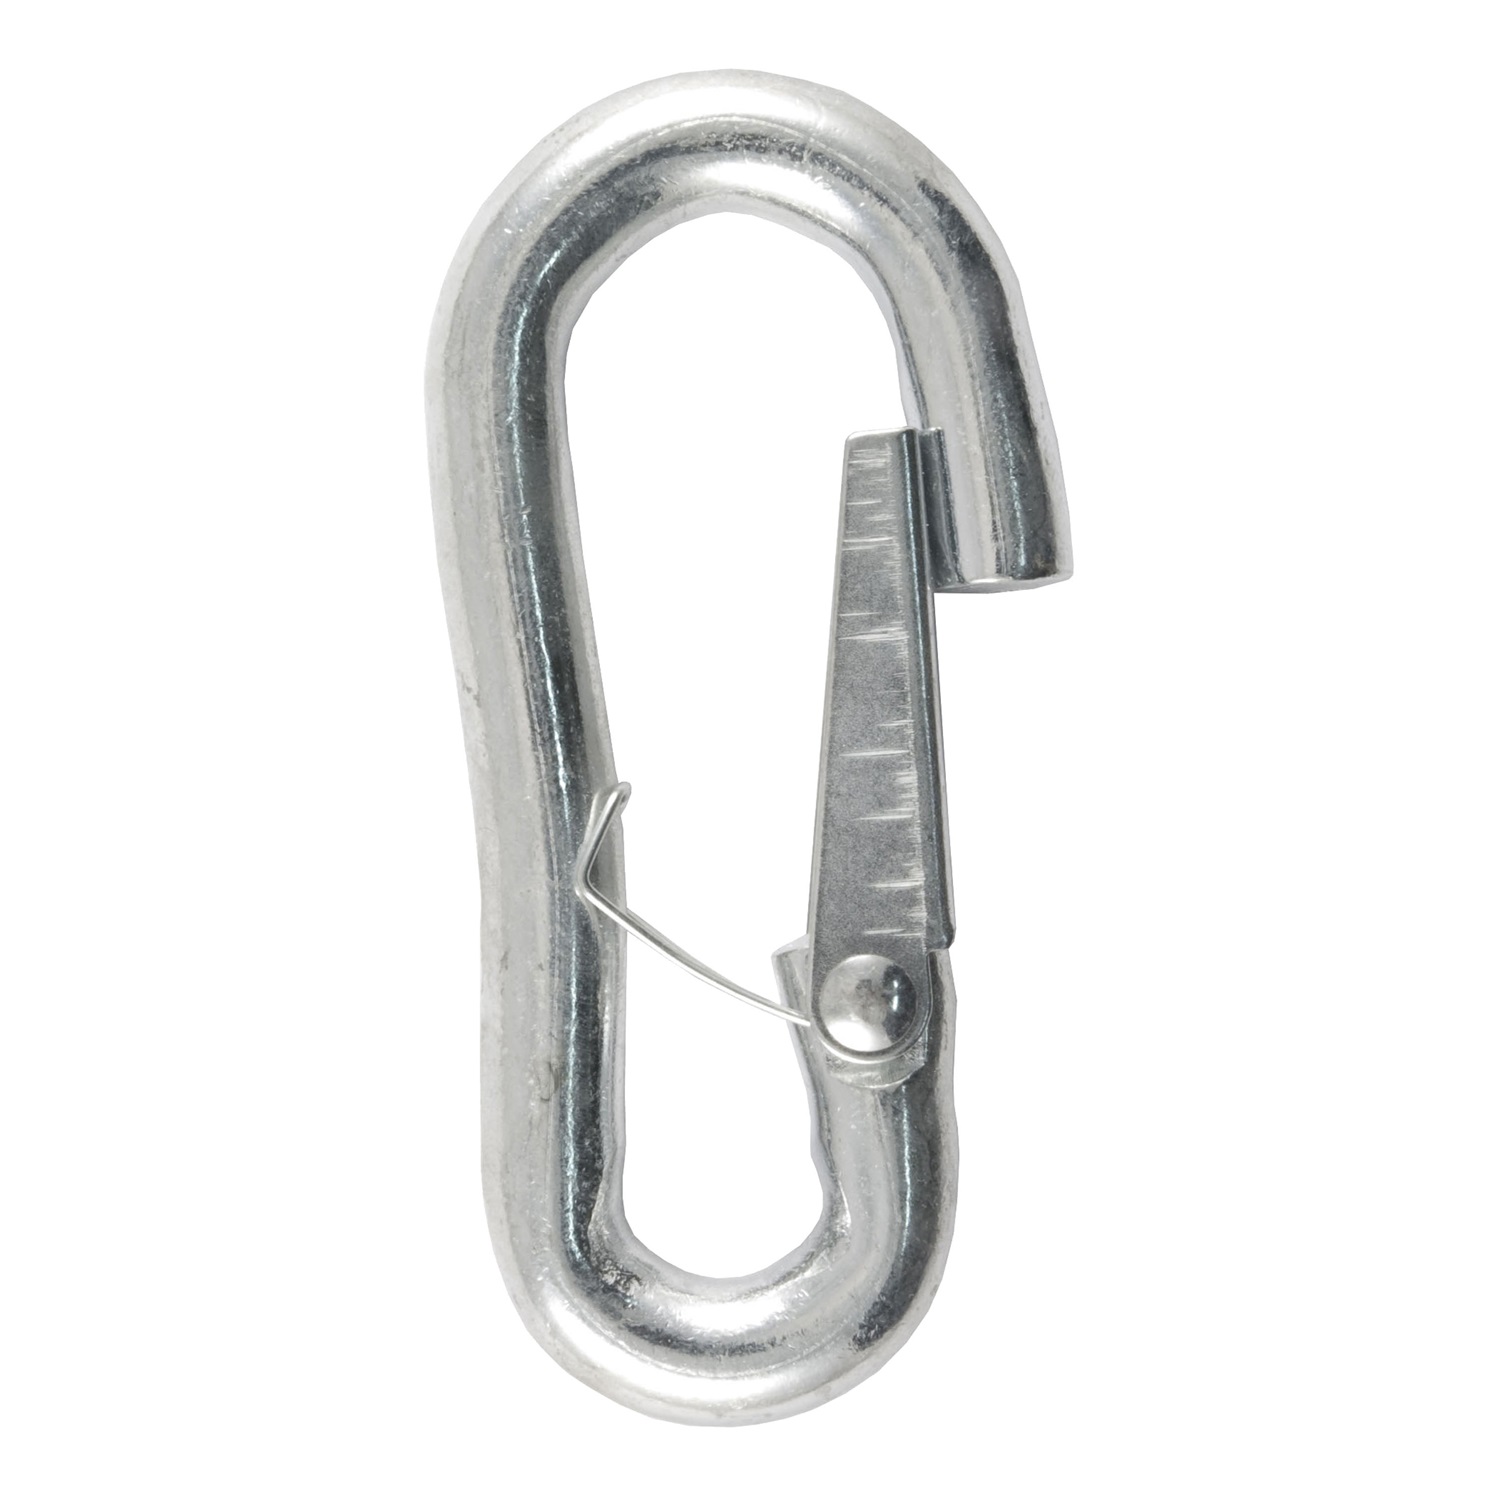 CURT Manufacturing CURT Manufacturing 81271 Class III; S-Hook w/Safety Latch  Fits